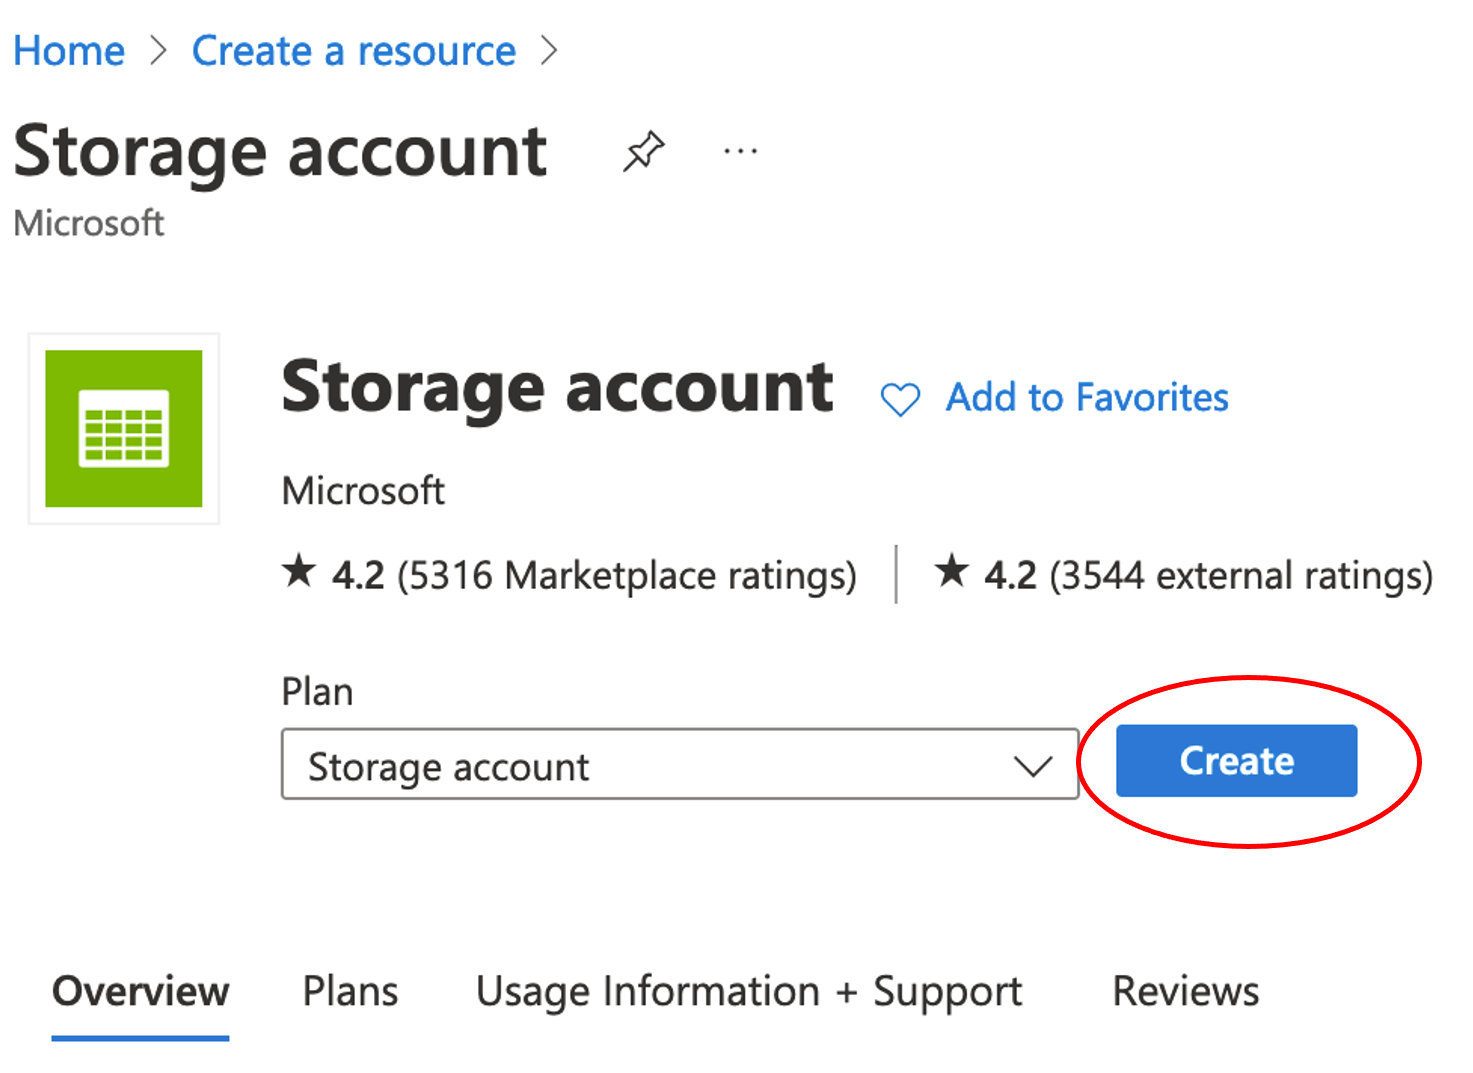 Creating a storage account